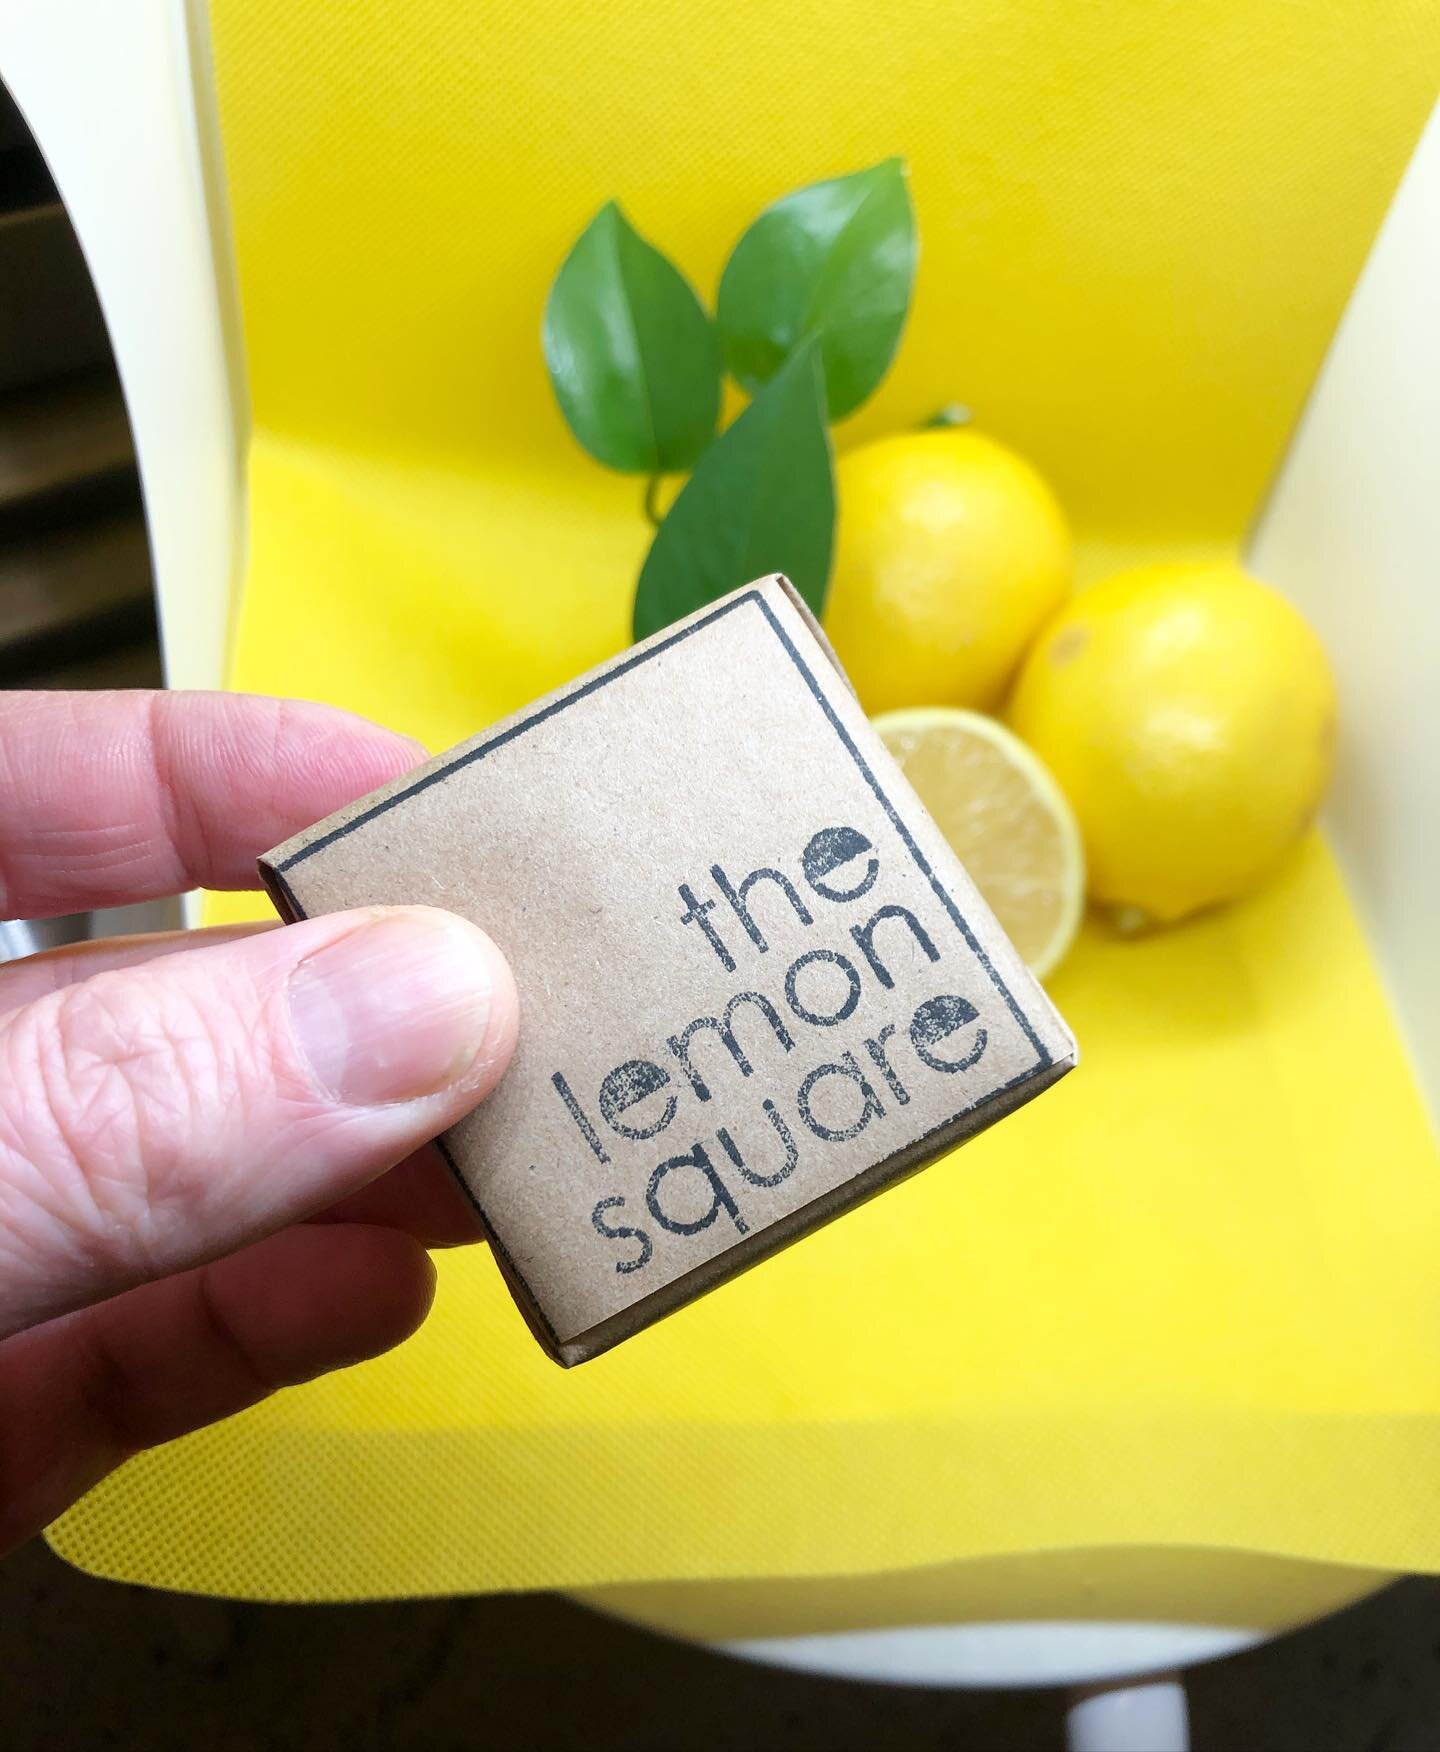 The OG that started it all. These little #lemonsquares are each individually wrapped (by hand) and super convenient to snack, gift, grab on the go. Now available at the new @milanoroasters in Victoria @milanovictoriabc ☕️☕️☕️🍋🍋🍋